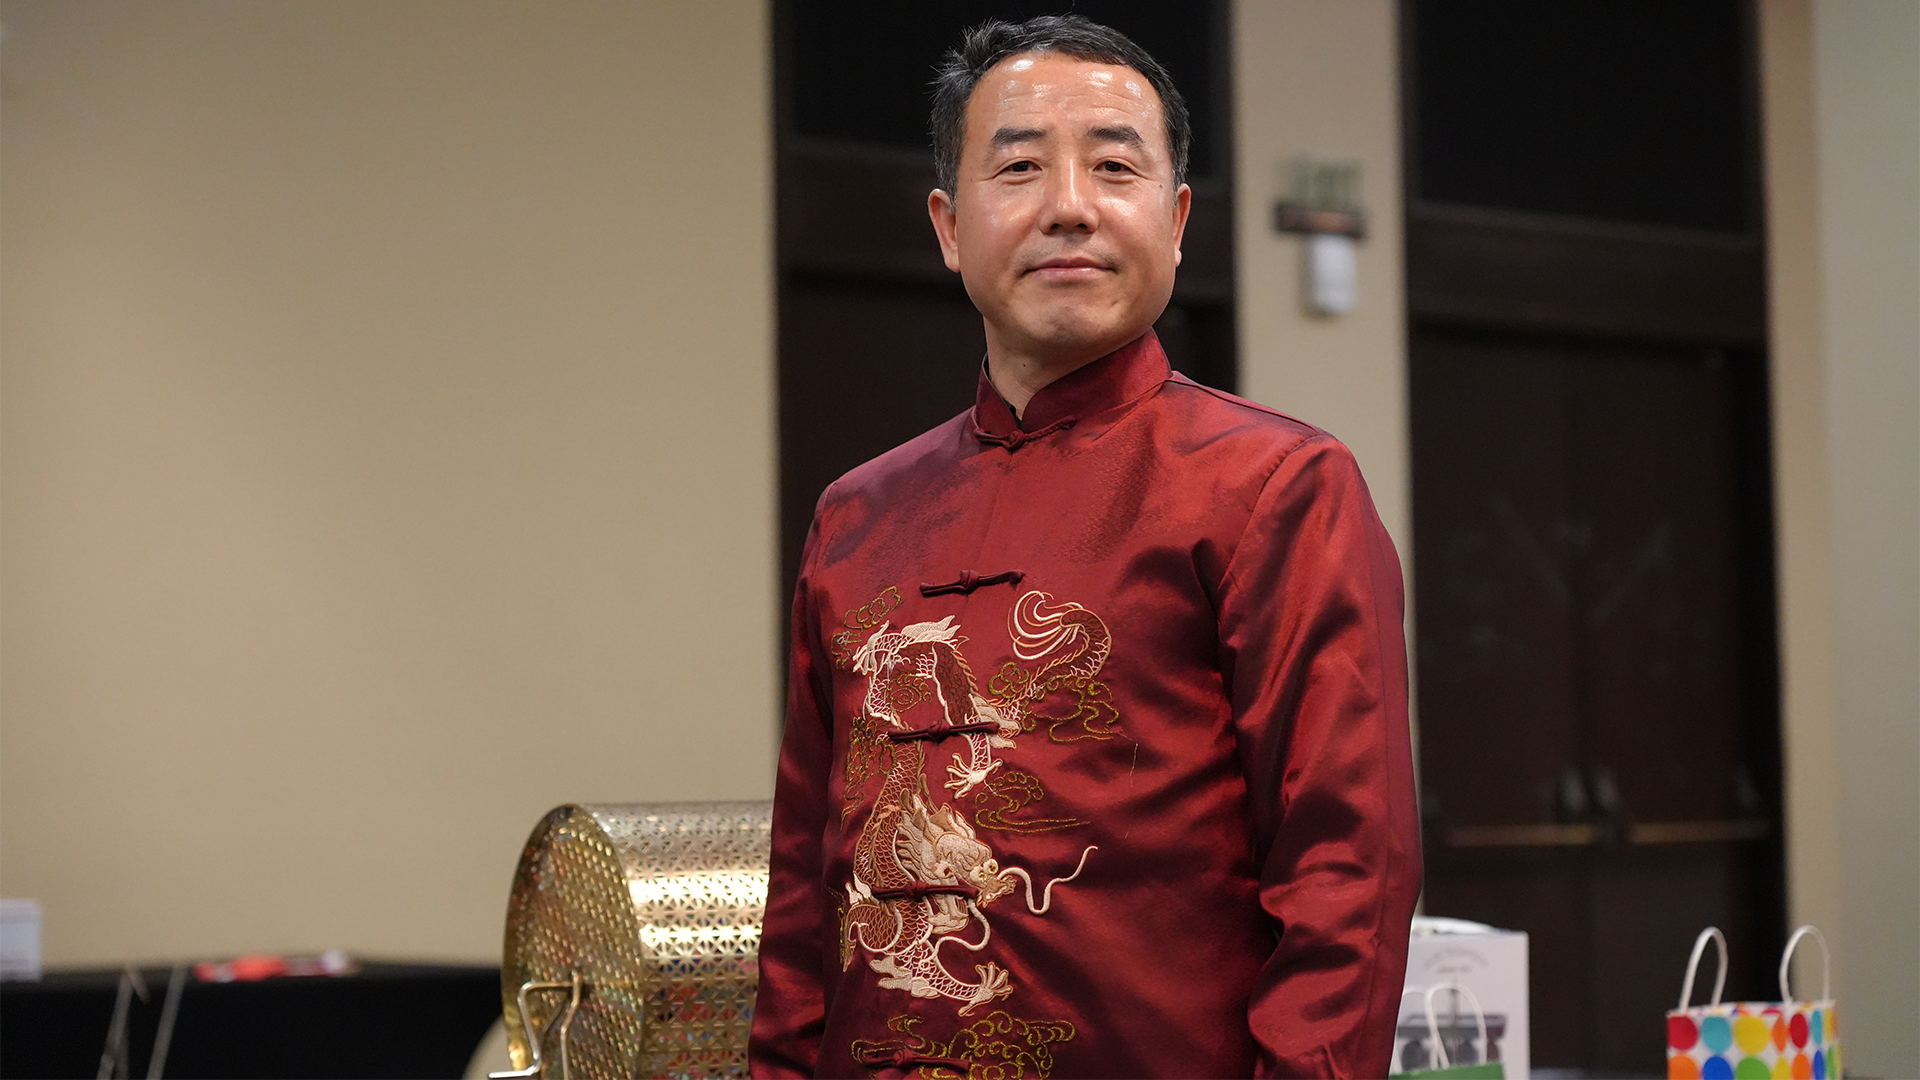 Father Peter Zhai, The Director of Chinese Ministry for the Archdiocese of San Francisco